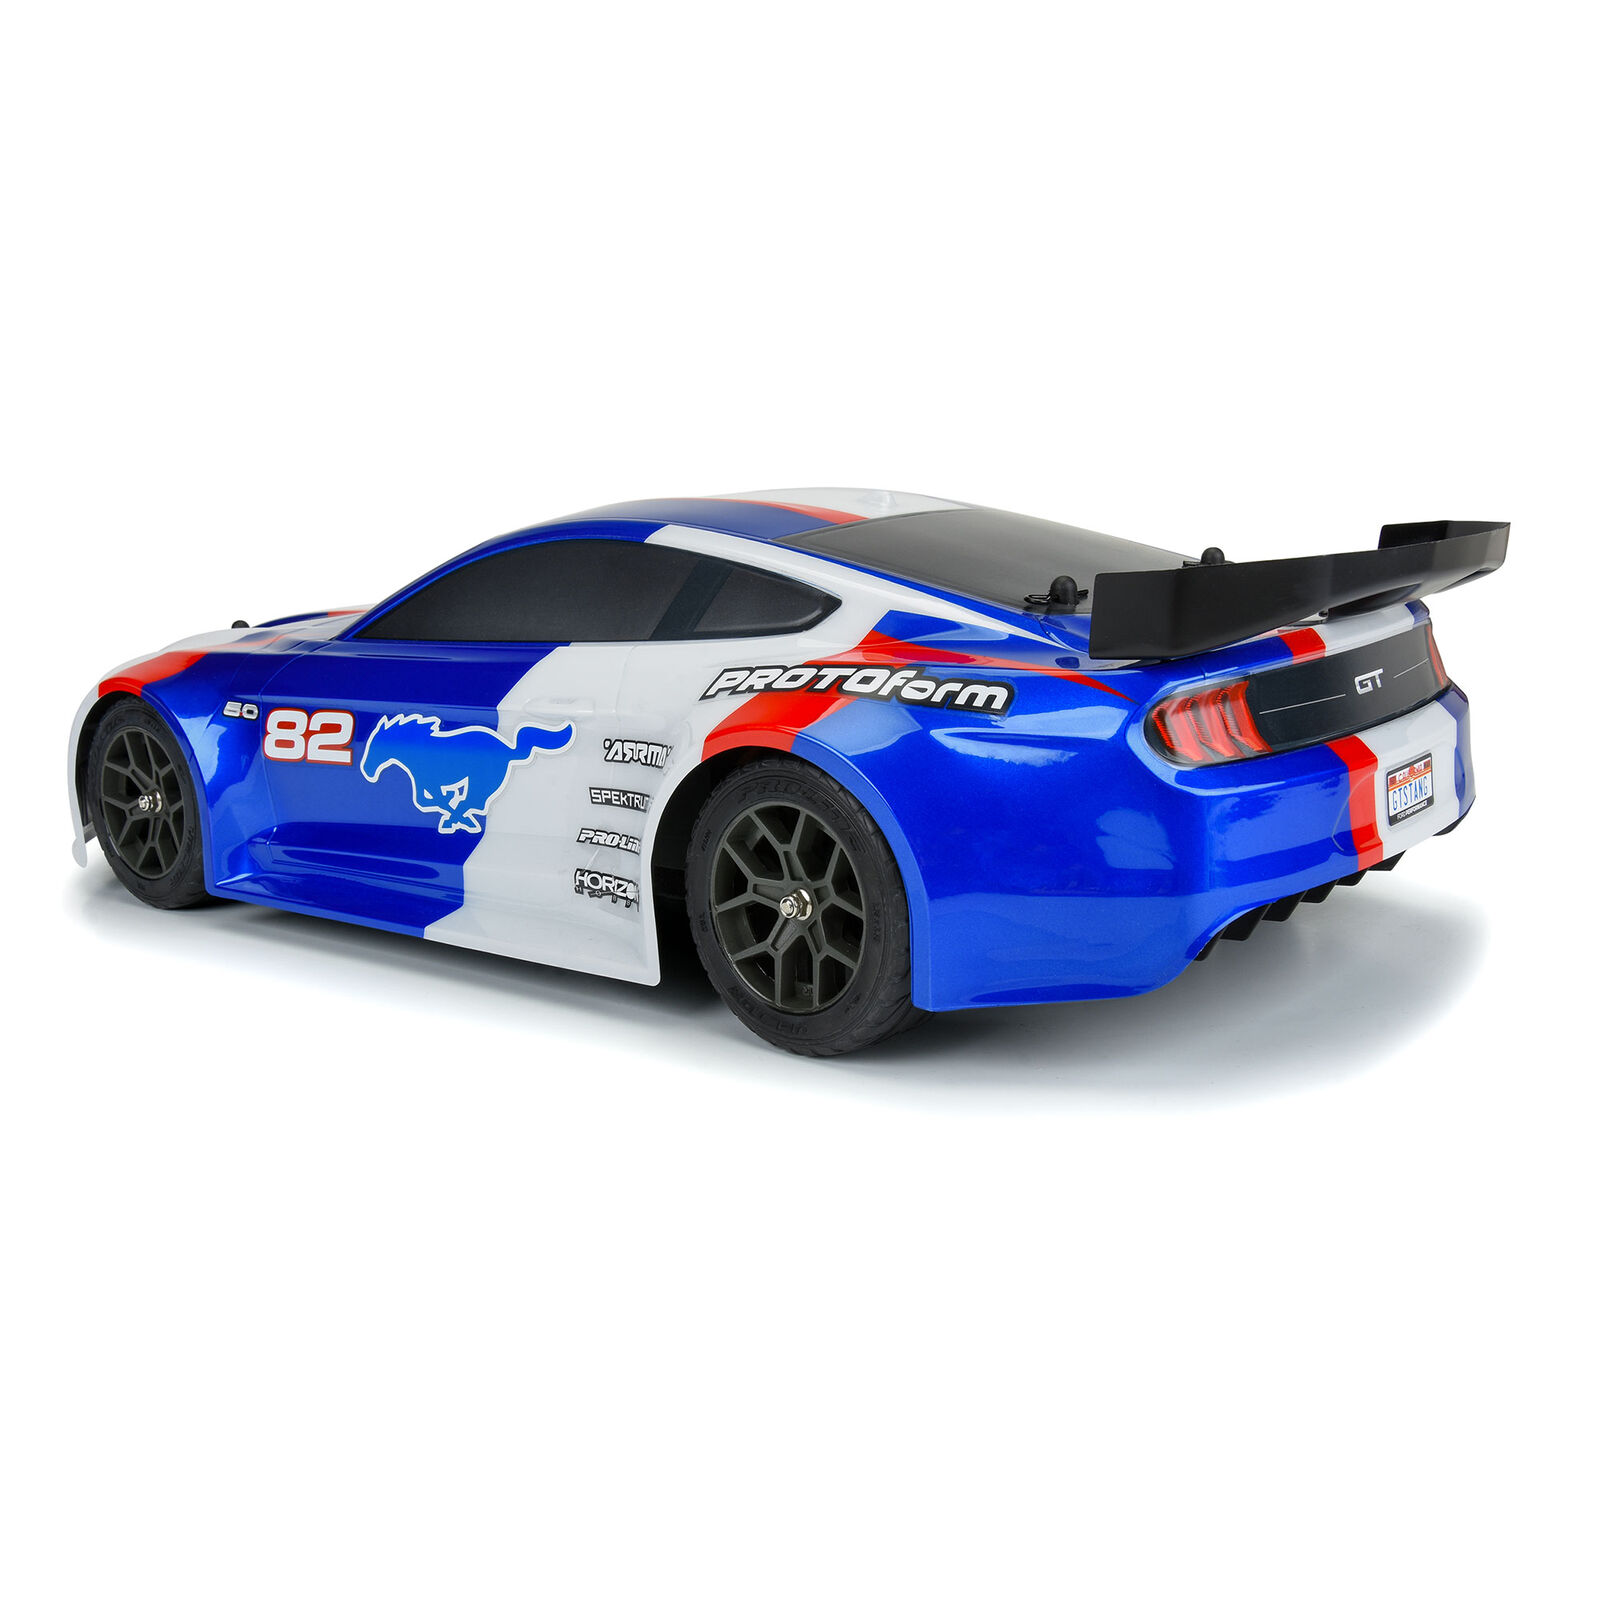 2021 Ford Racing Vendetta PROTOform Pro-Line Painted Body Pro-line Infraction 3S | (Blue): - & 1/8 Mustang